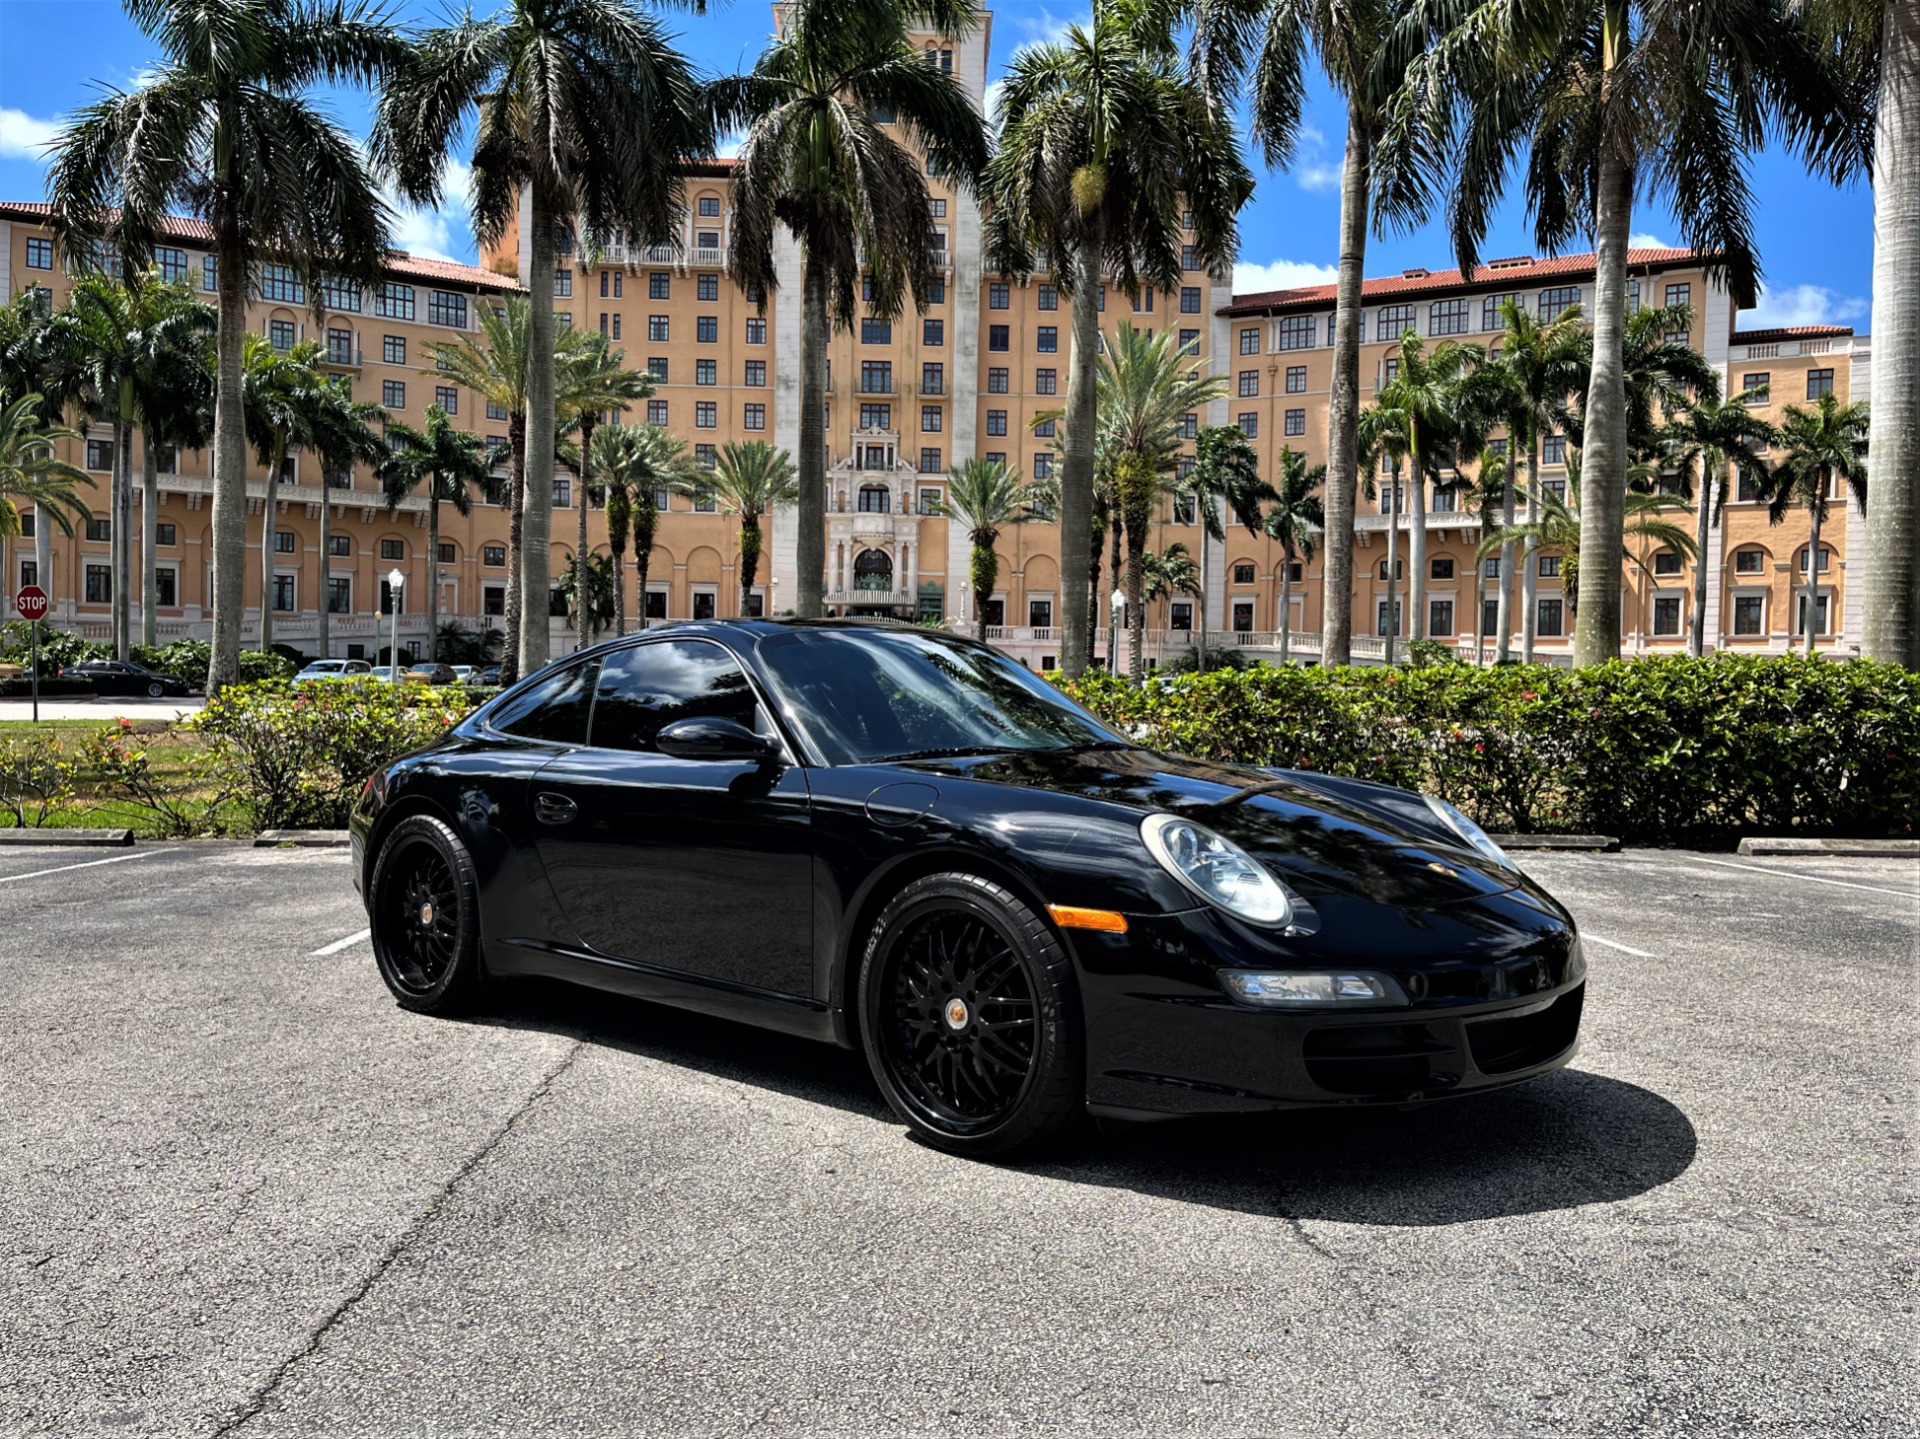 Used 2008 Porsche 911 Carrera for sale Sold at The Gables Sports Cars in Miami FL 33146 1